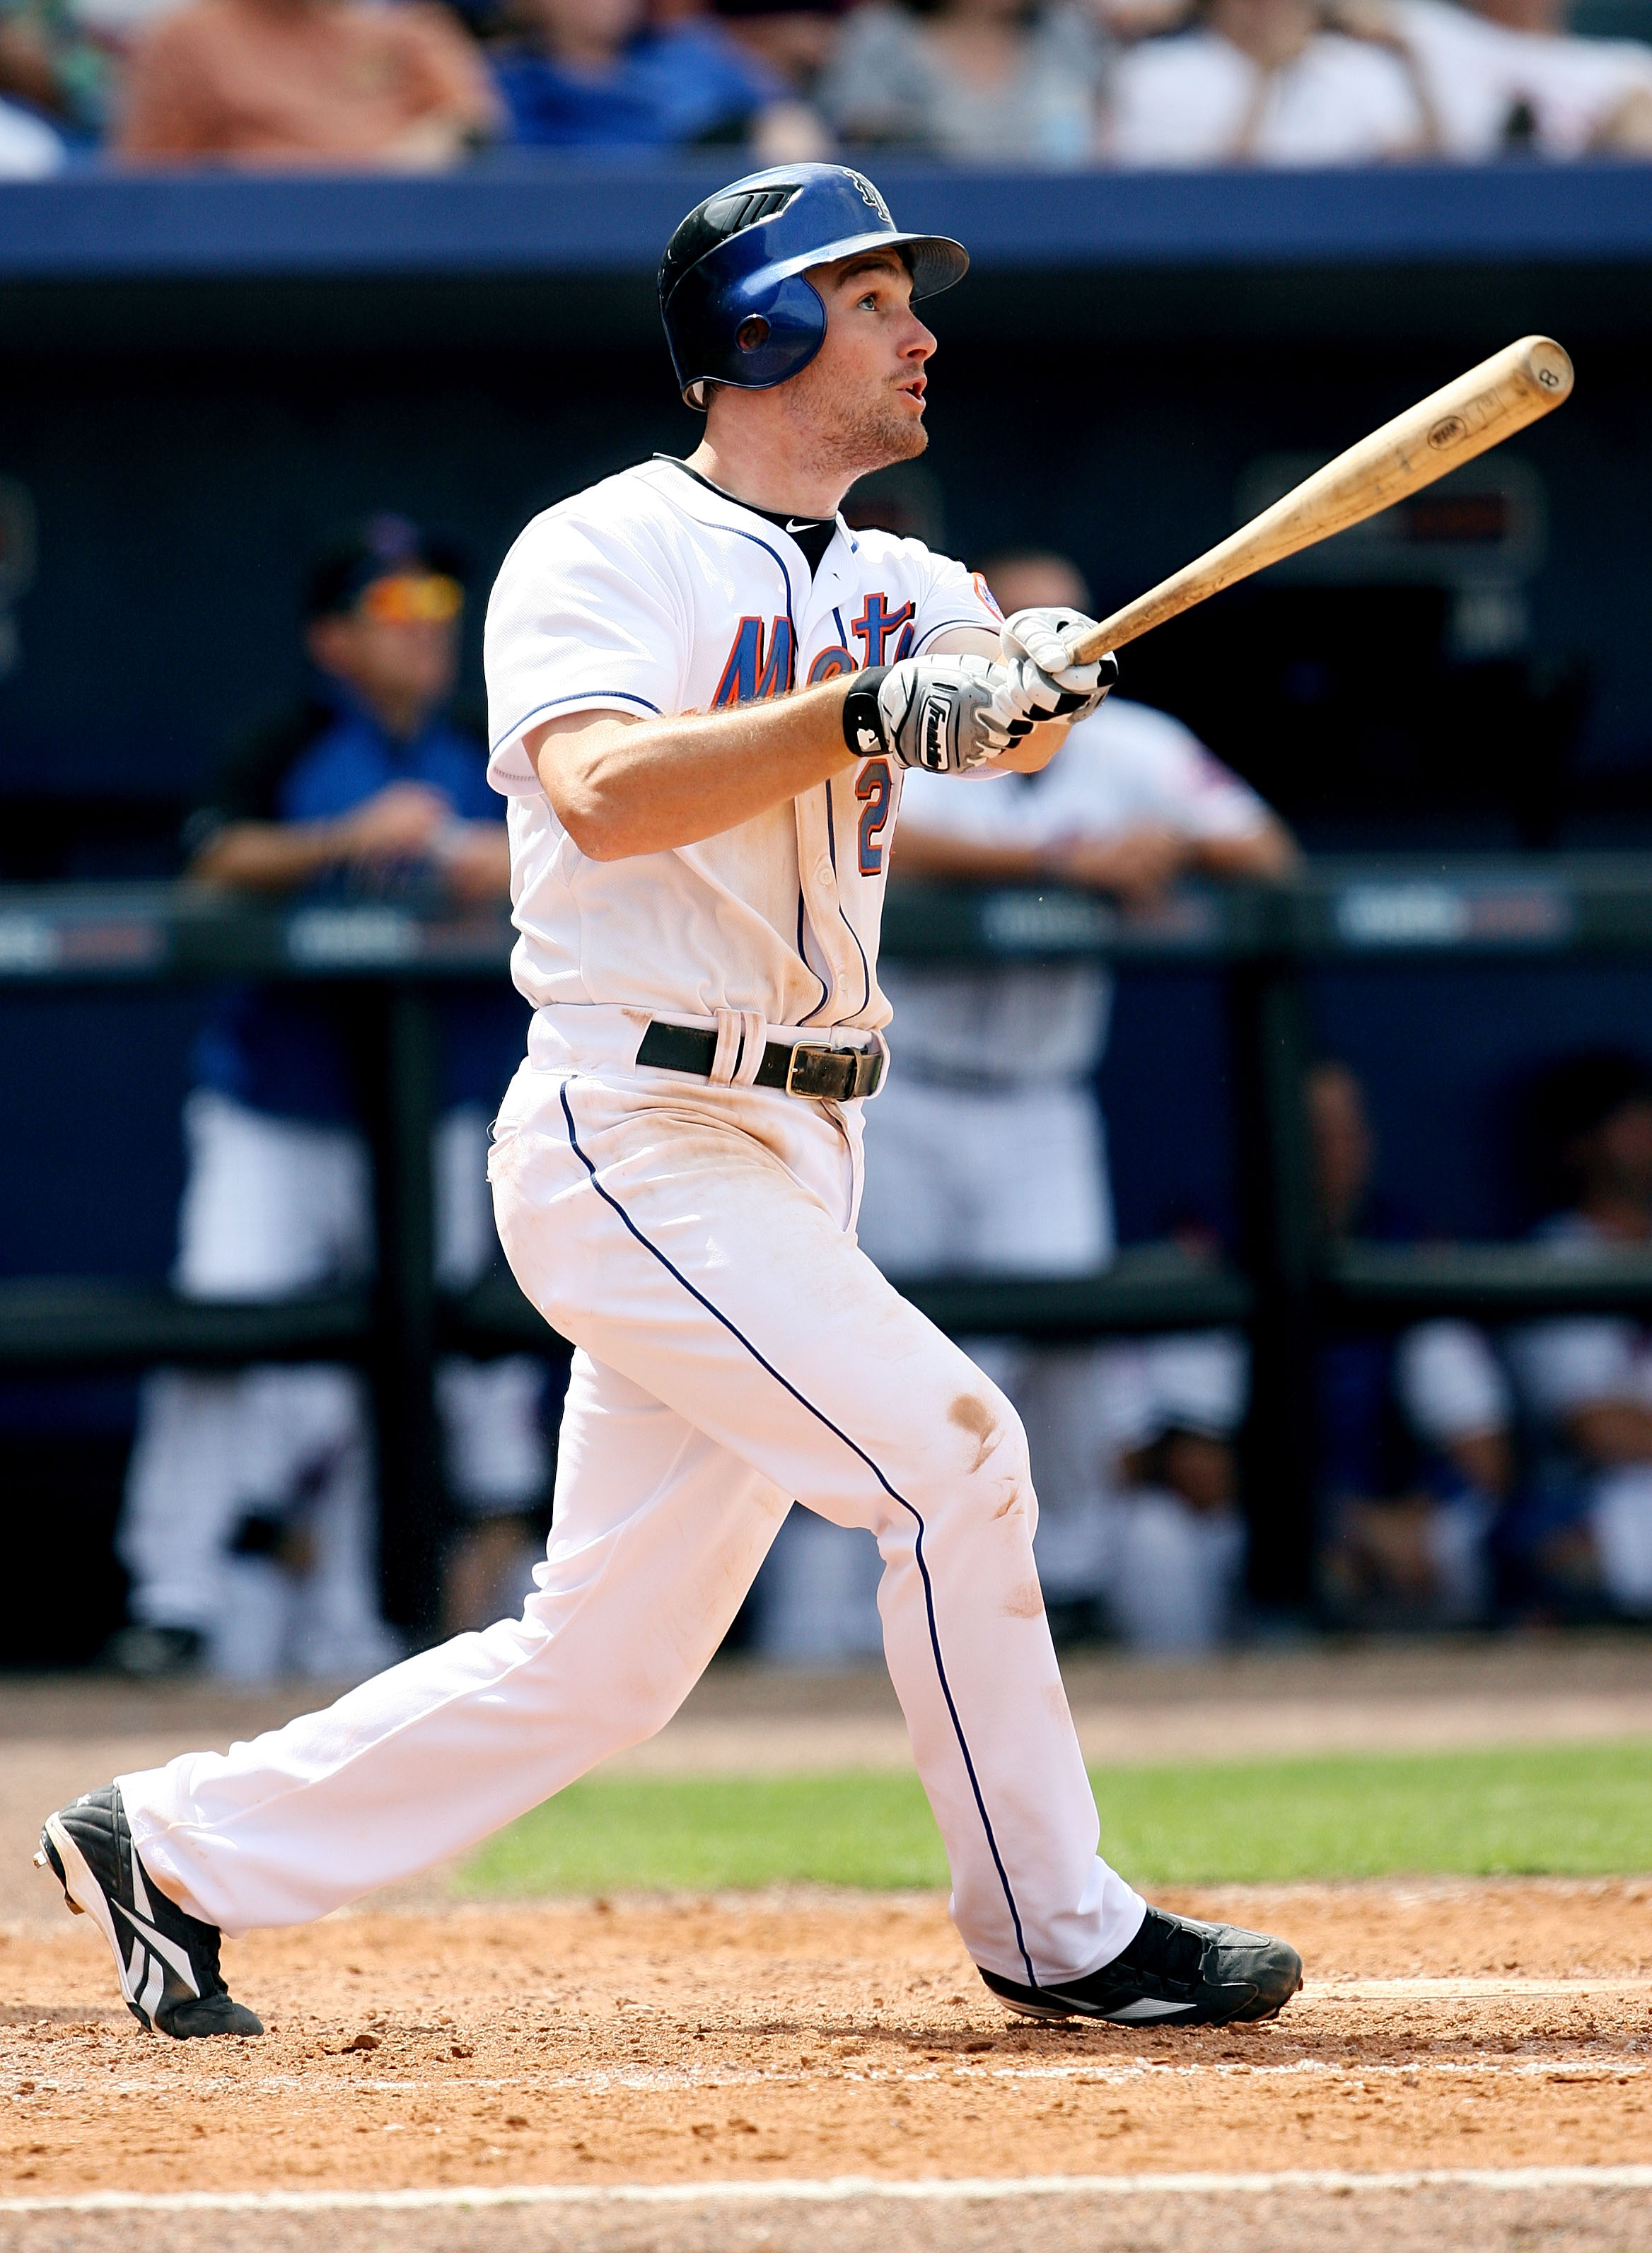 PORT ST. LUCIE, FL - MARCH 24:  Daniel Murphy #28 of the New York Mets hits a two-run home run against the Houston Astros at Tradition Field on March 24, 2010 in Port St. Lucie, Florida.  (Photo by Doug Benc/Getty Images)